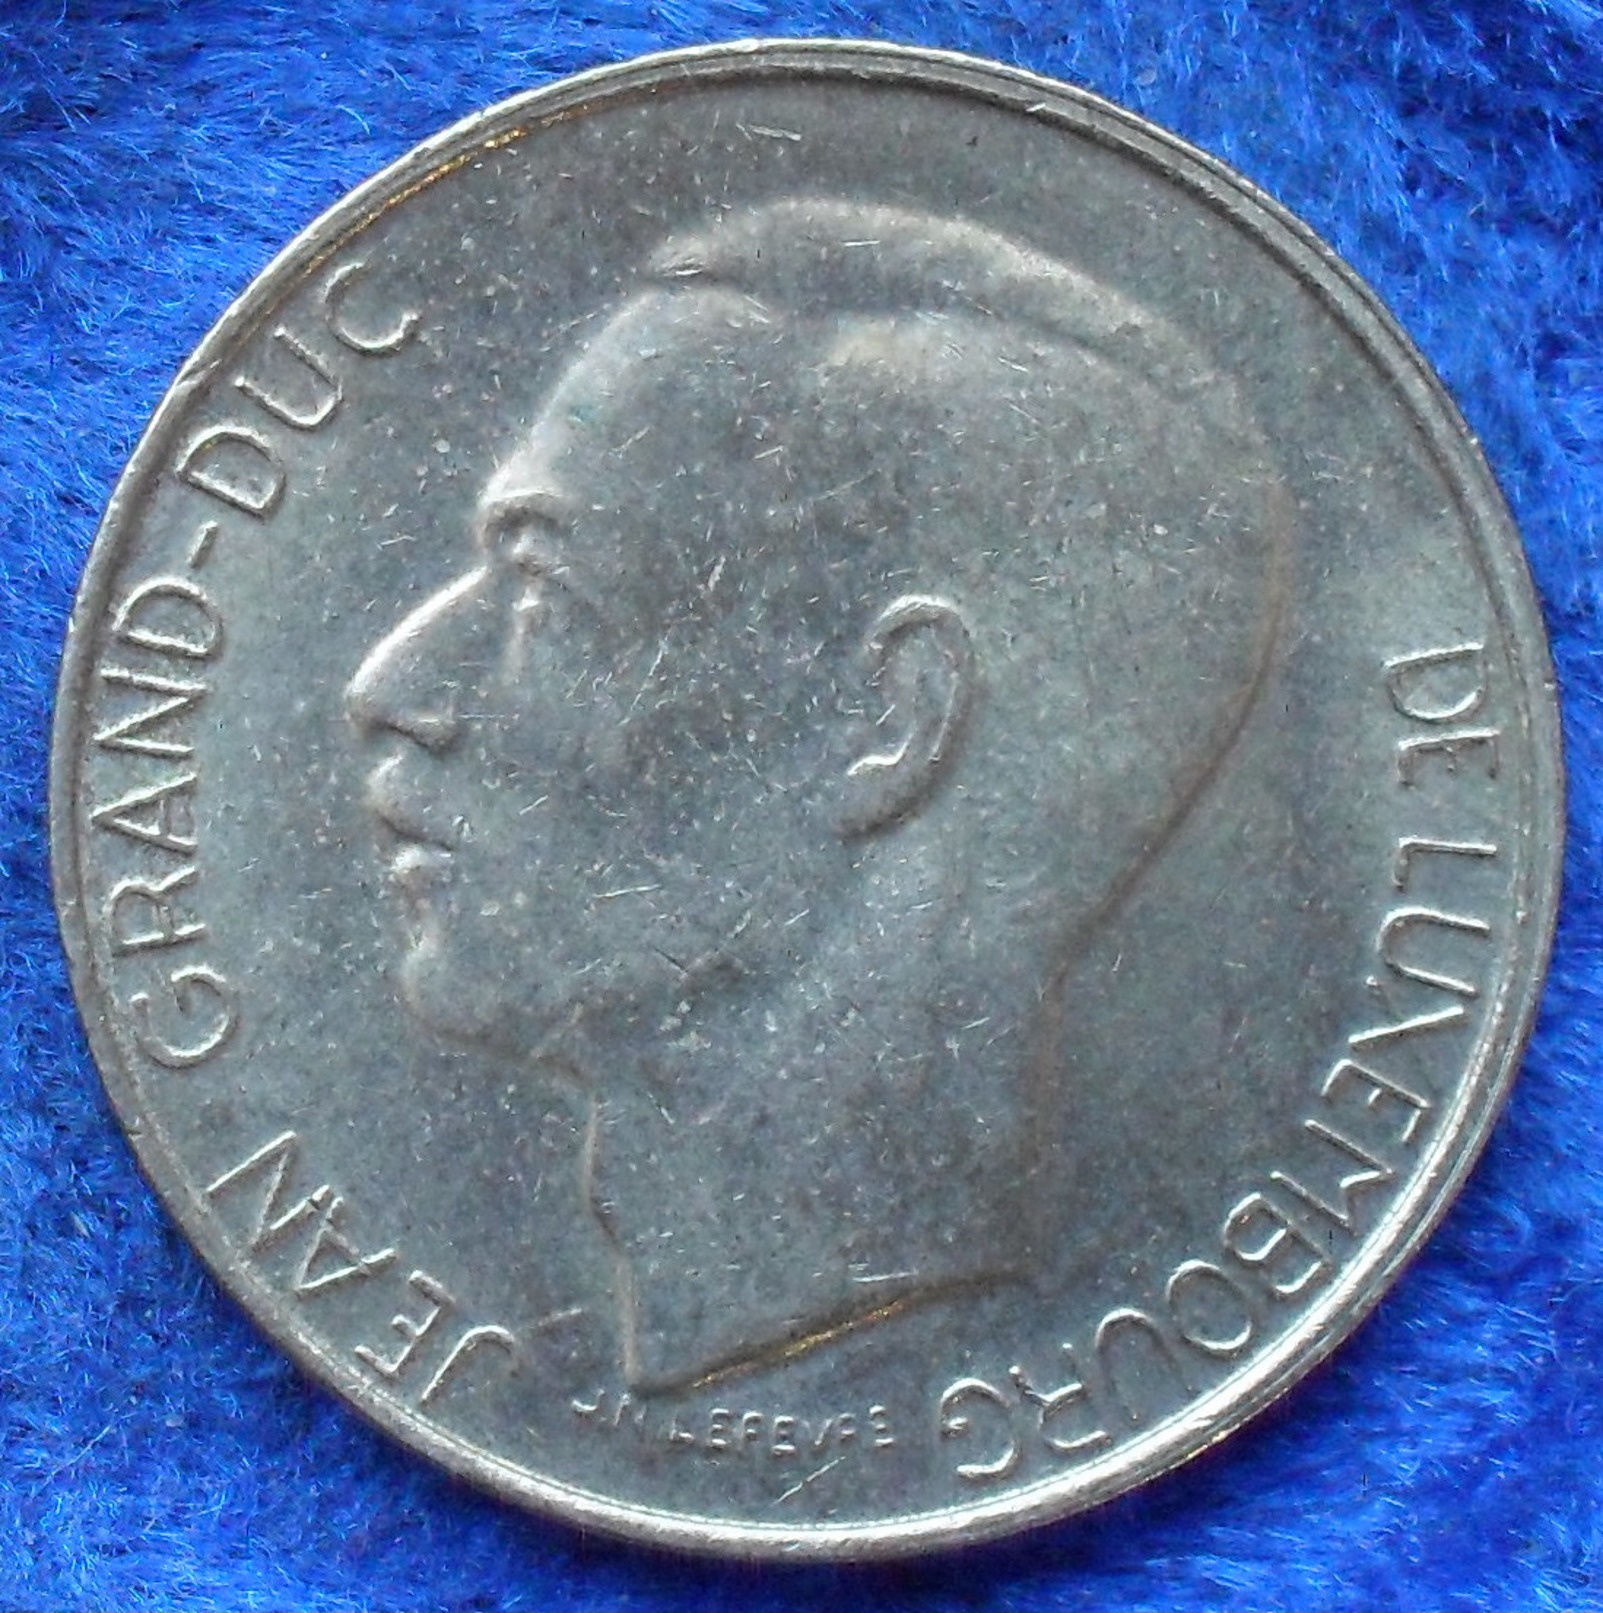 LUXEMBOURG - 5 Francs 1990 KM# 65 Jean (1964-2001) - Edelweiss Coins - Lussemburgo